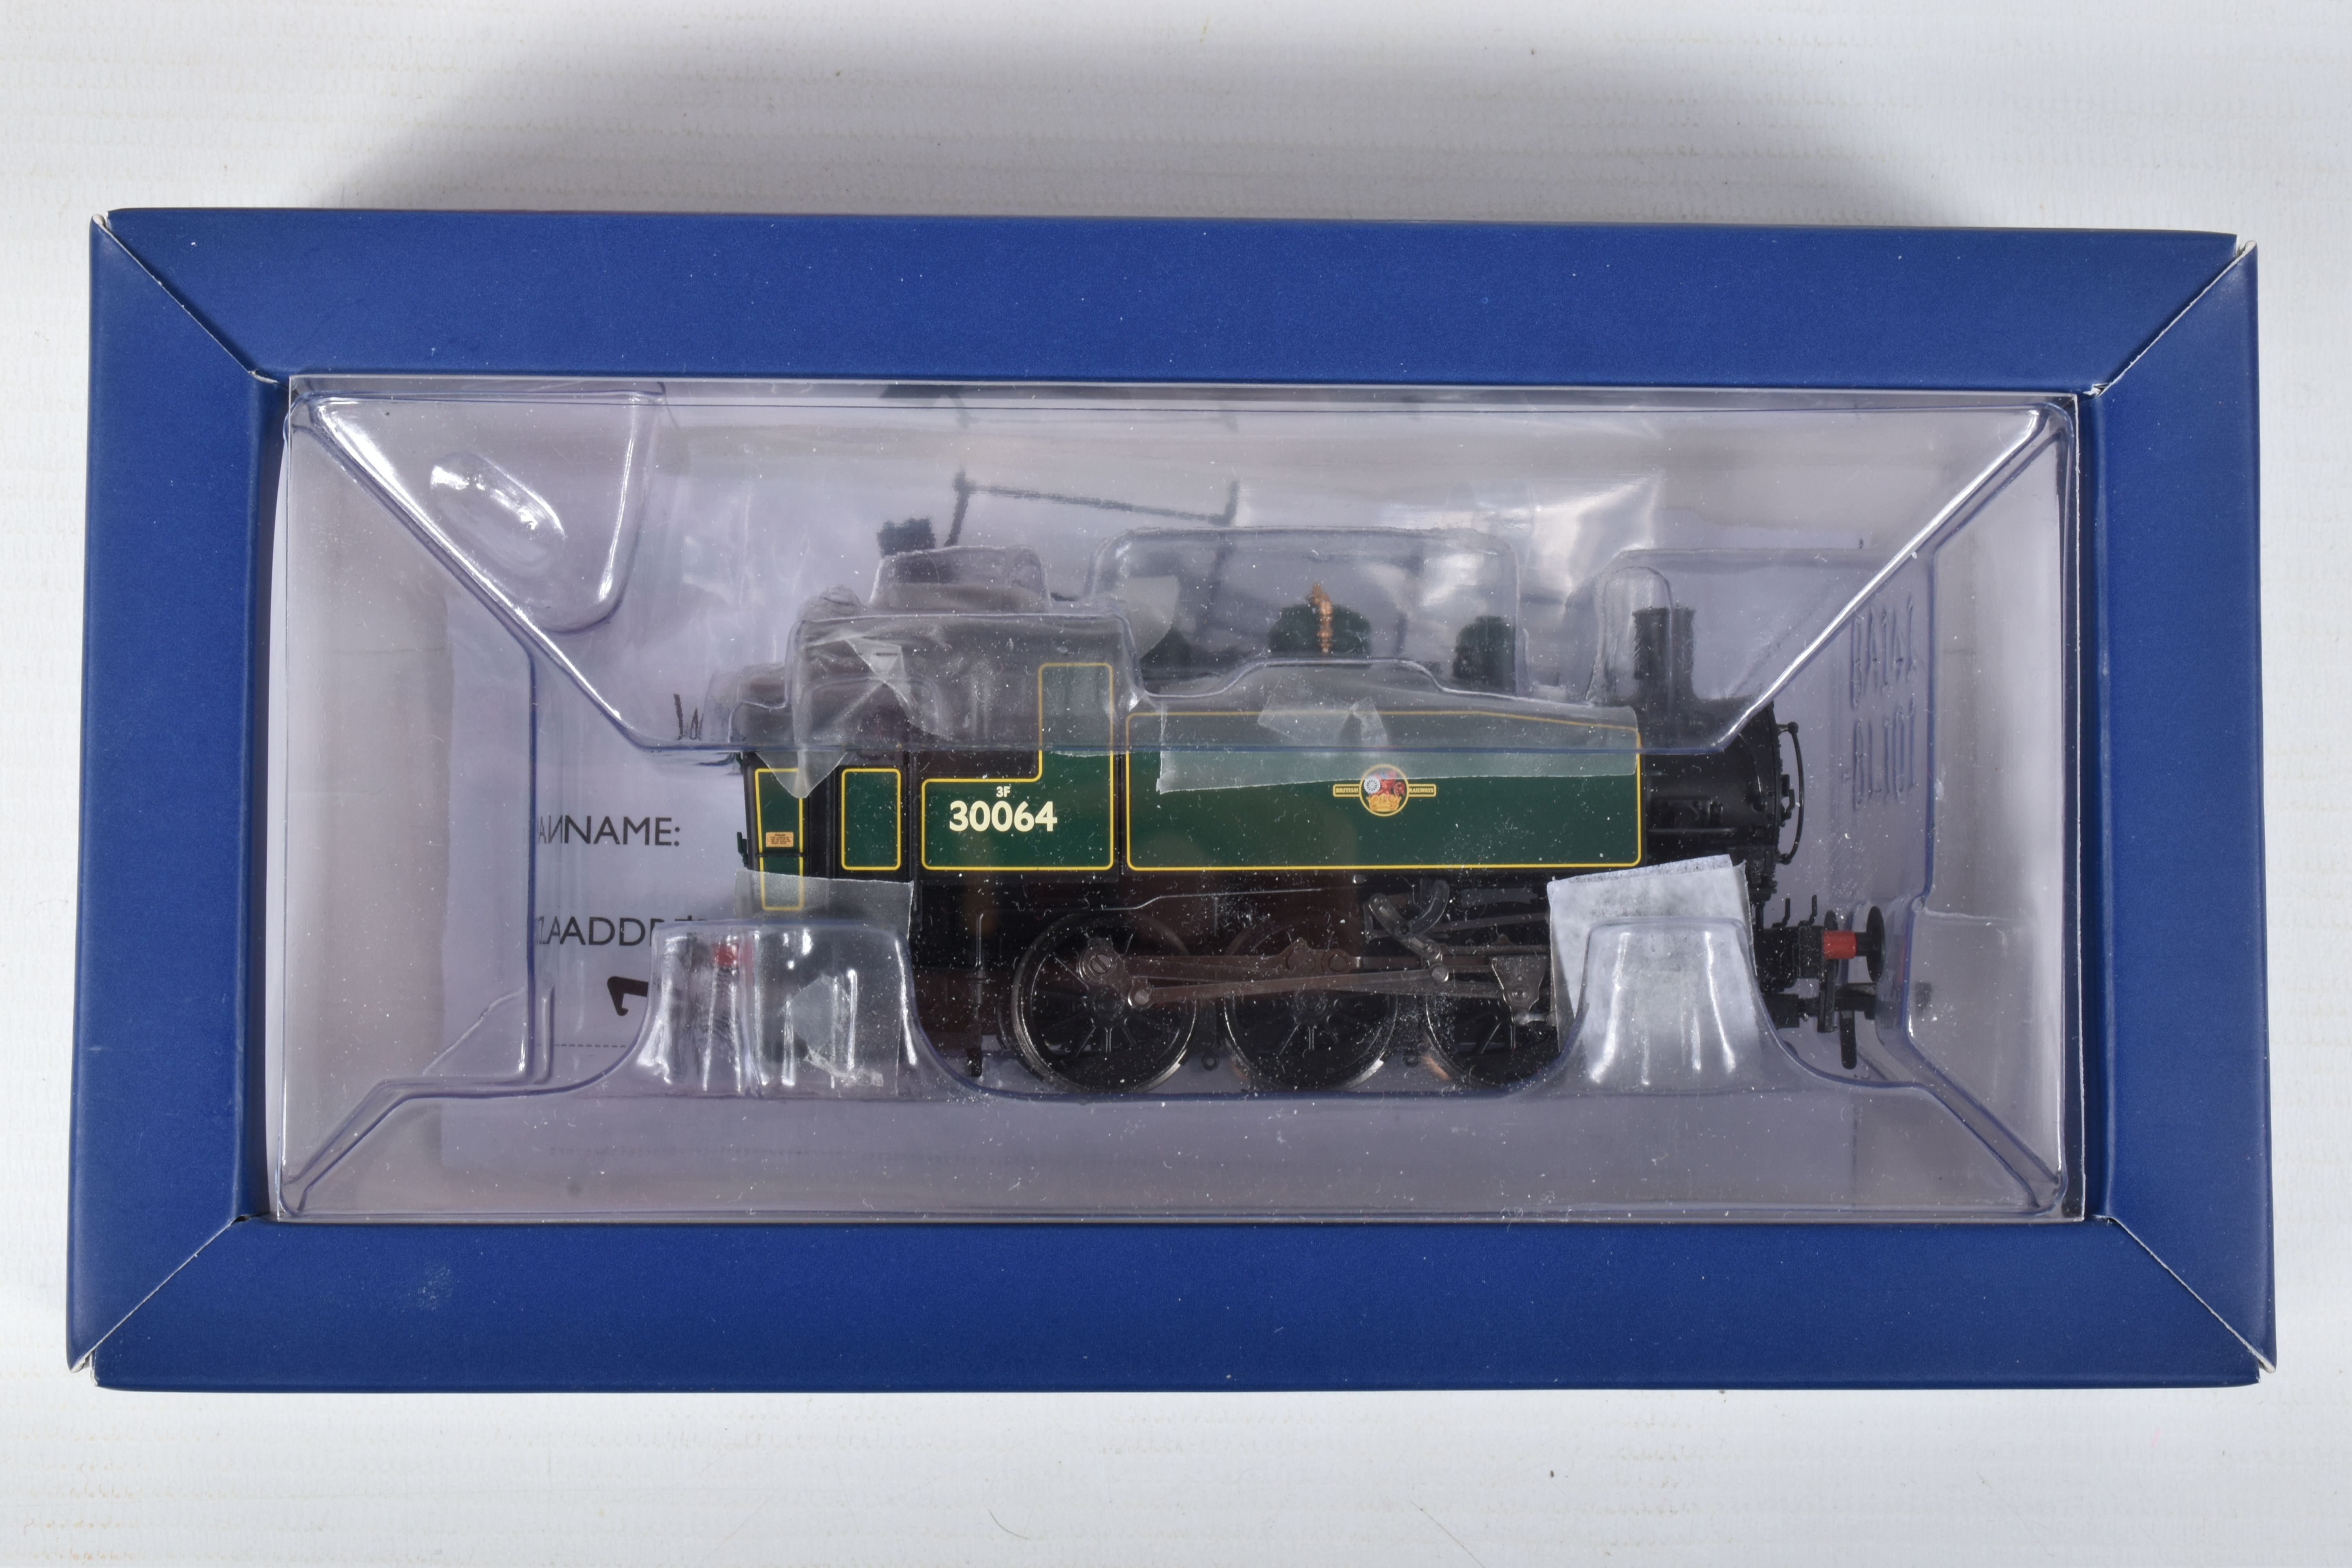 A BOXED OO GAUGE BACHMANN BRANCHLINE MODEL RAILWAY LOCOMOTIVE USA 0-6-0T no. 30064 in BR Lined - Image 3 of 3